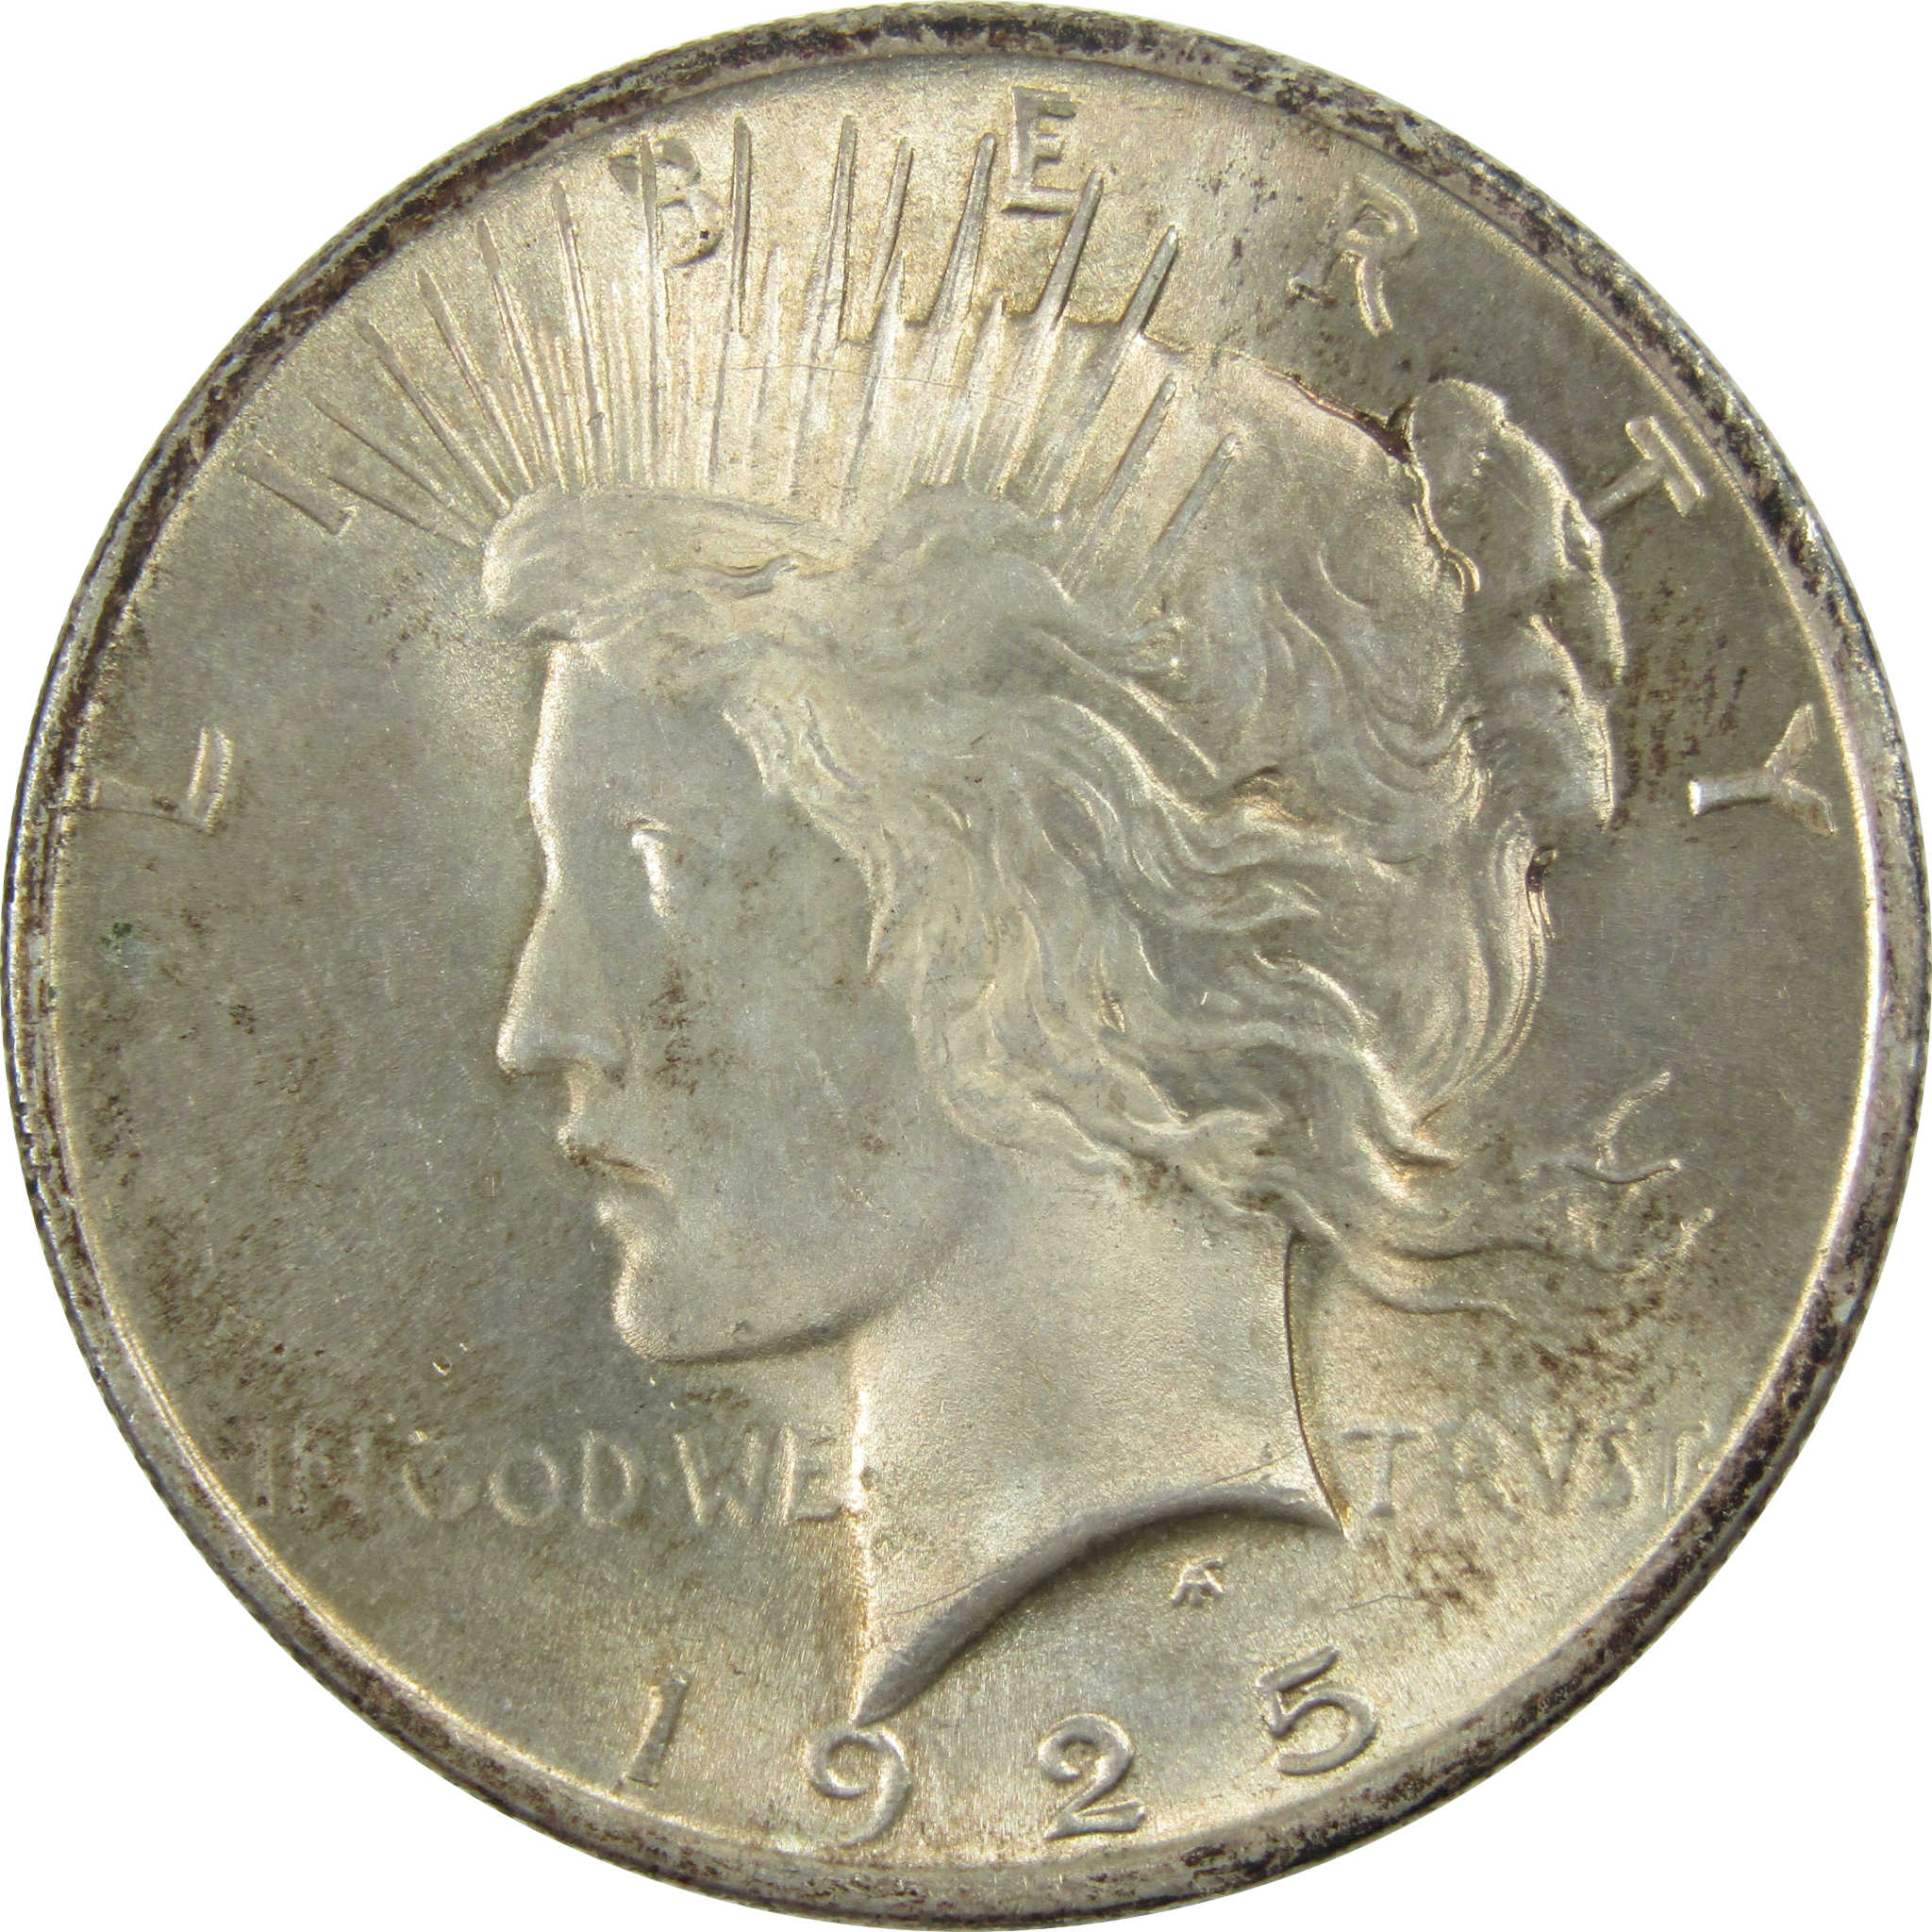 1925 Peace Dollar AU About Uncirculated Silver $1 Coin SKU:I13066